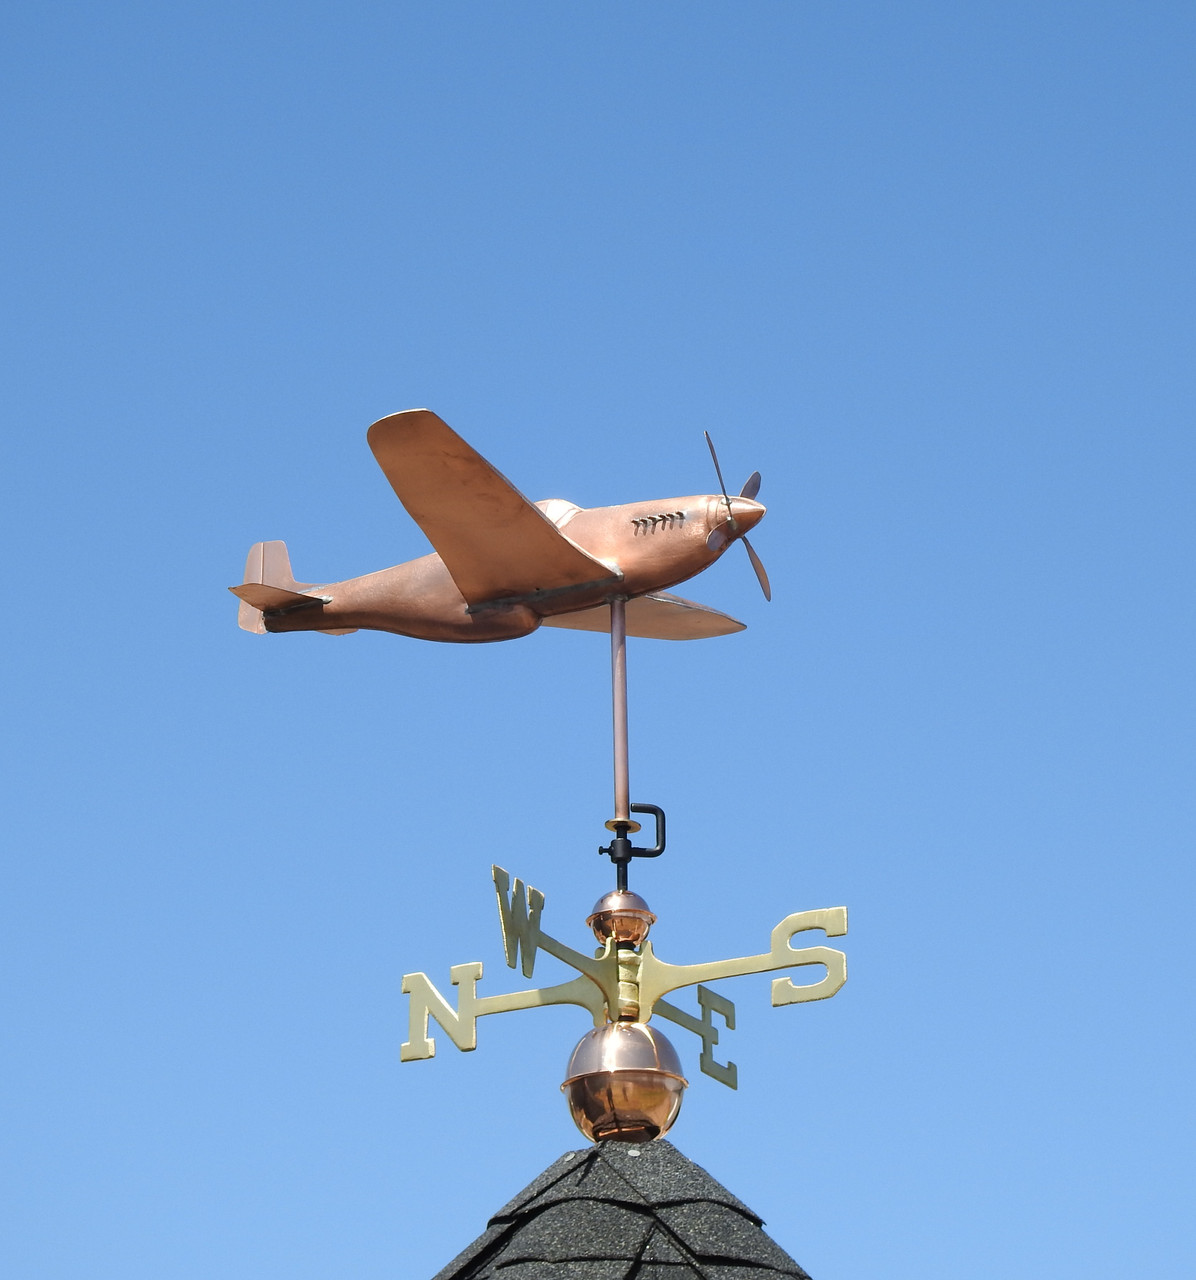 P51 Mustang Fighter Plane Weathervane at Weathervanes of Maine